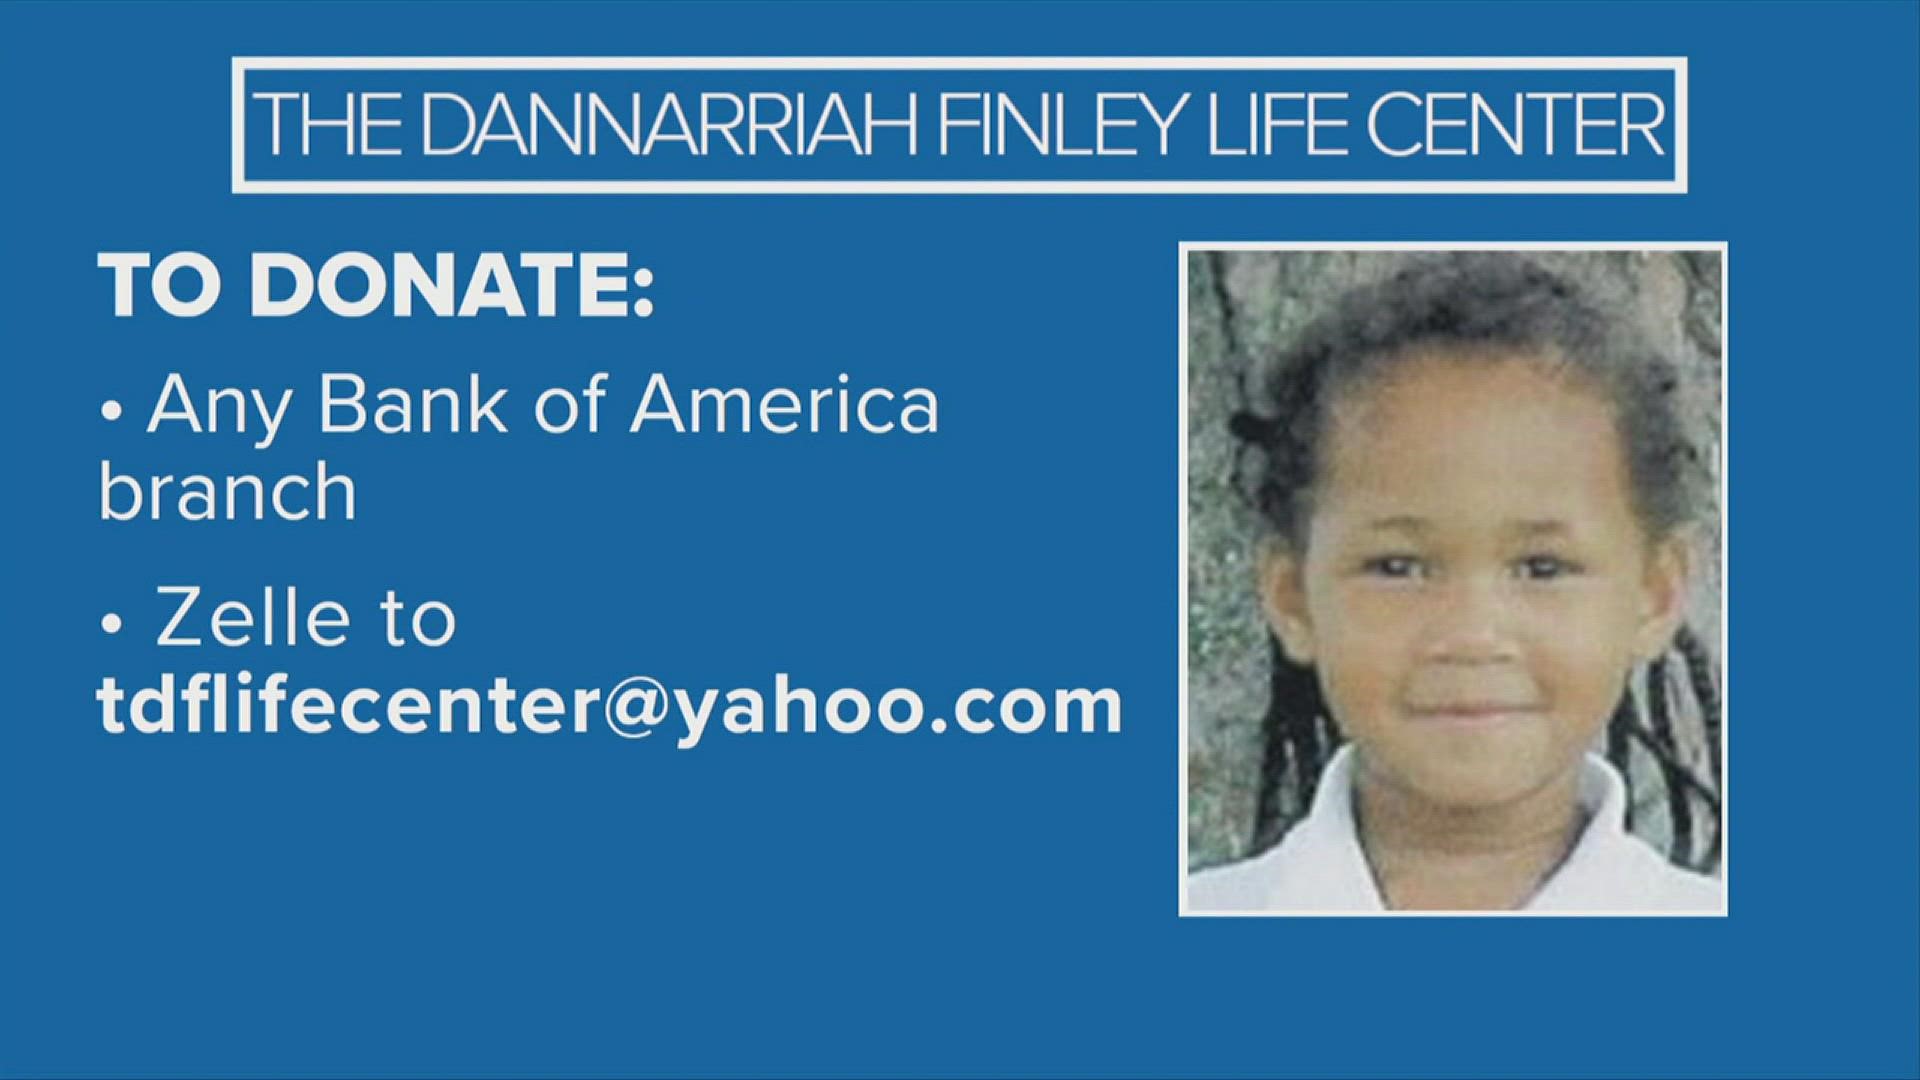 Dannarriah Finley was only 4 years old when she was taken from her home in Orange and killed in 2002.